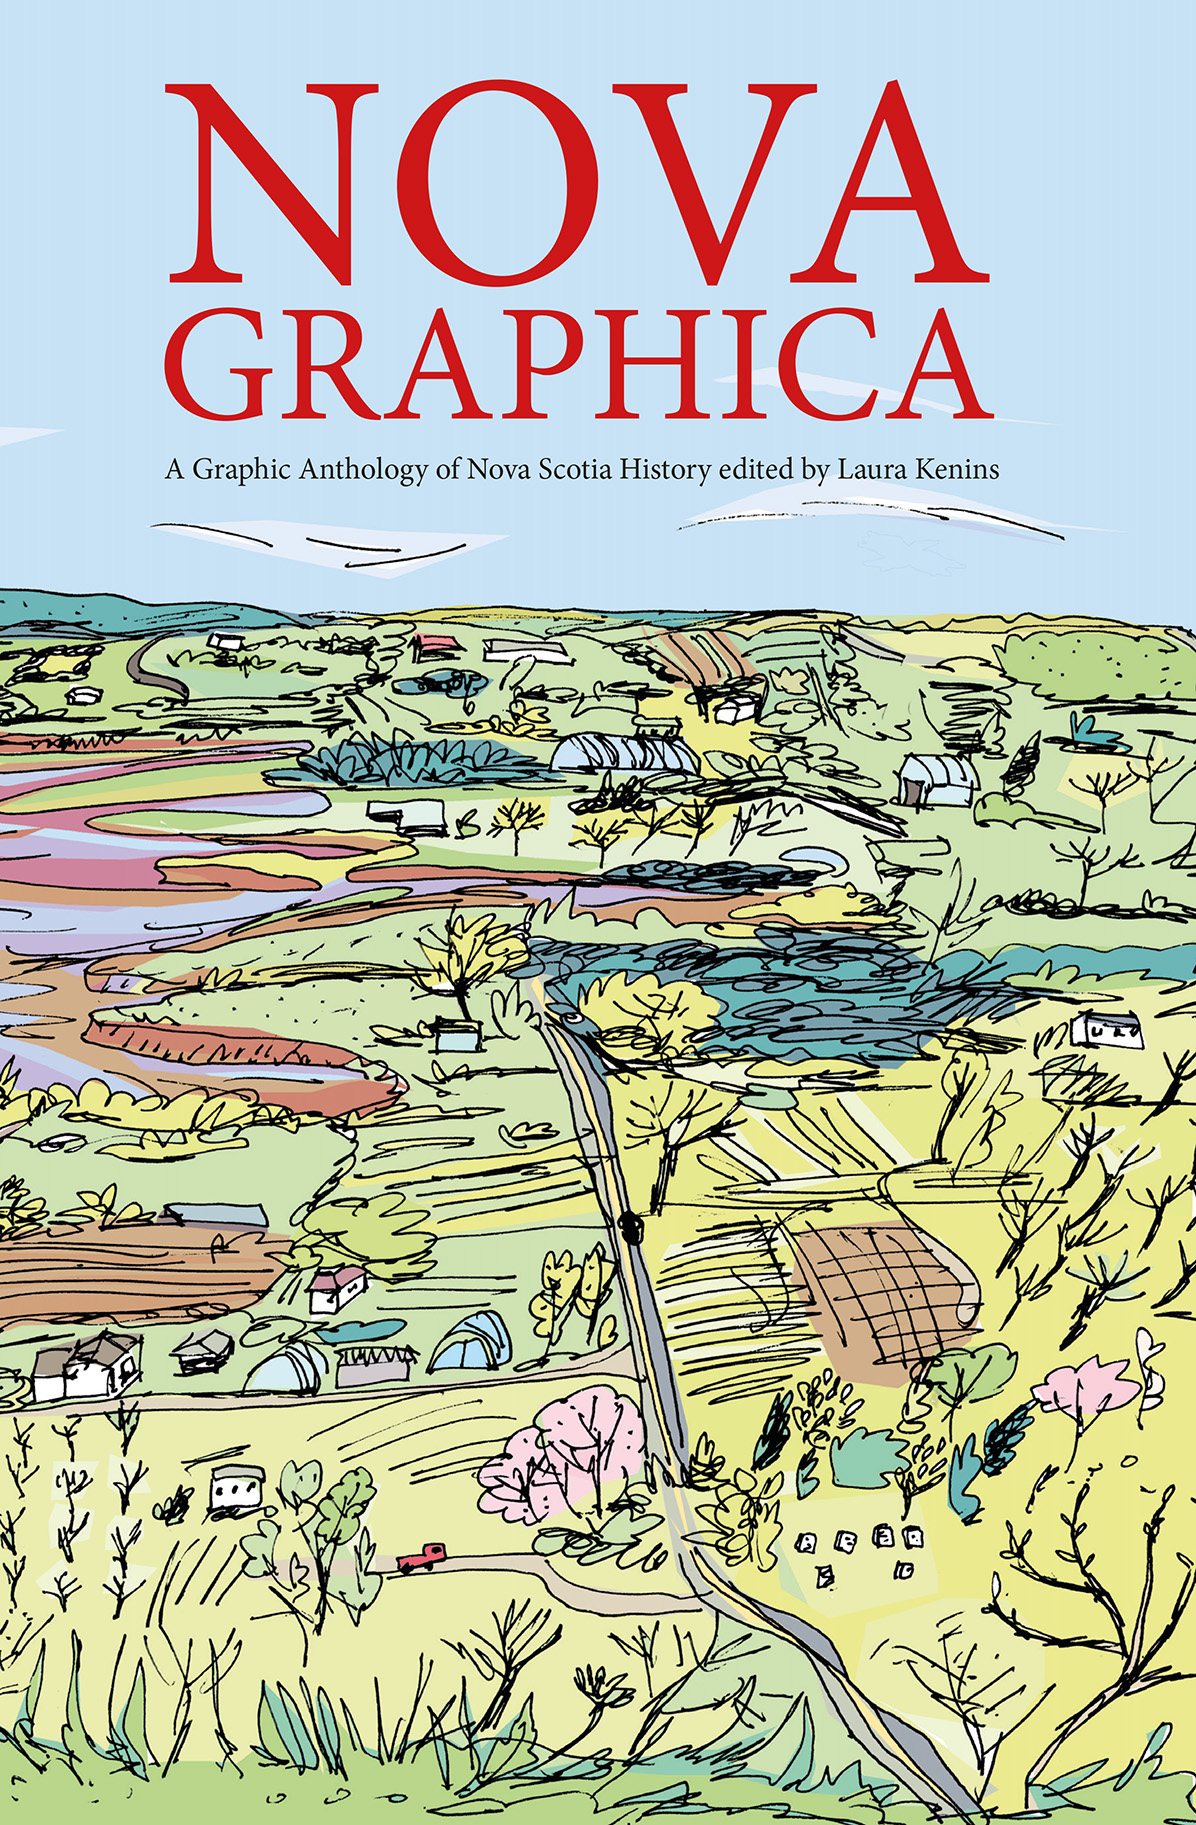 Nova Graphica Cover edited by Laura Kenins and published by Conundrum Press